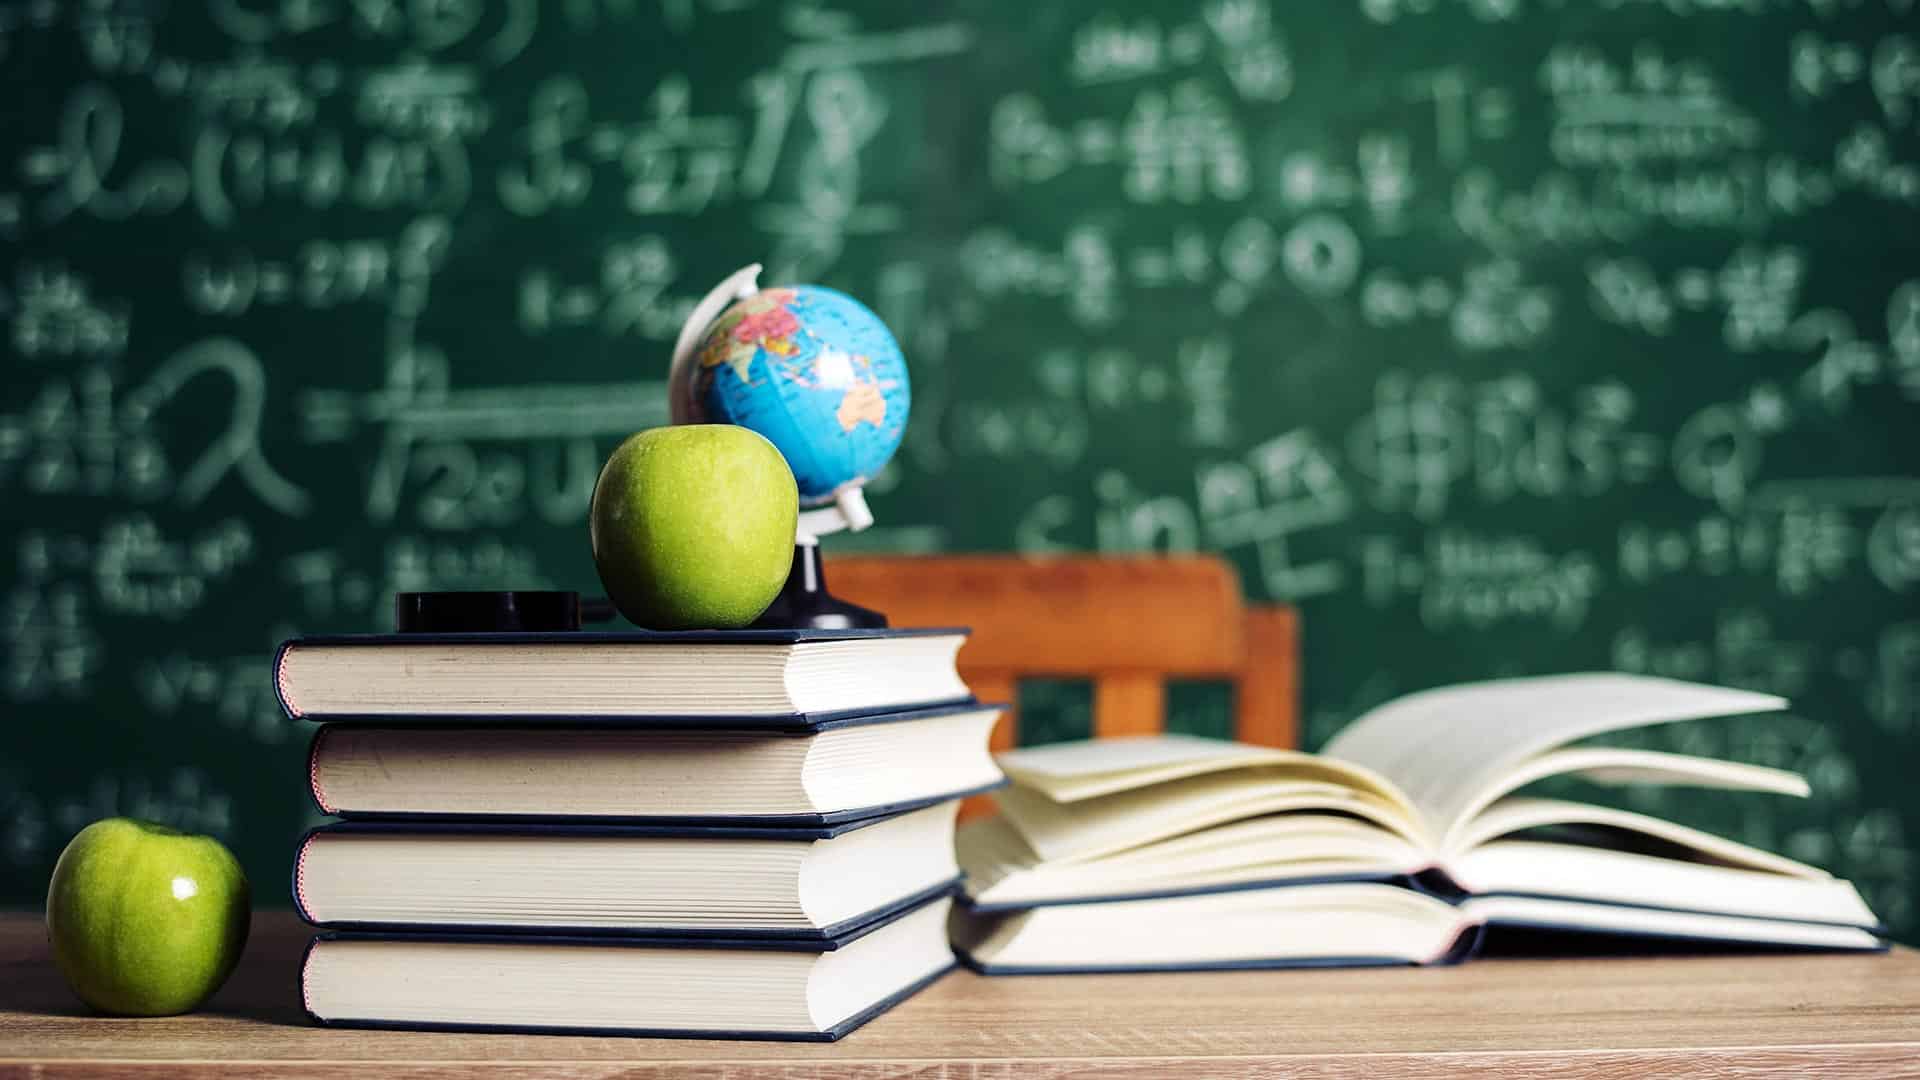 Texas to invest US$123.3 million in education